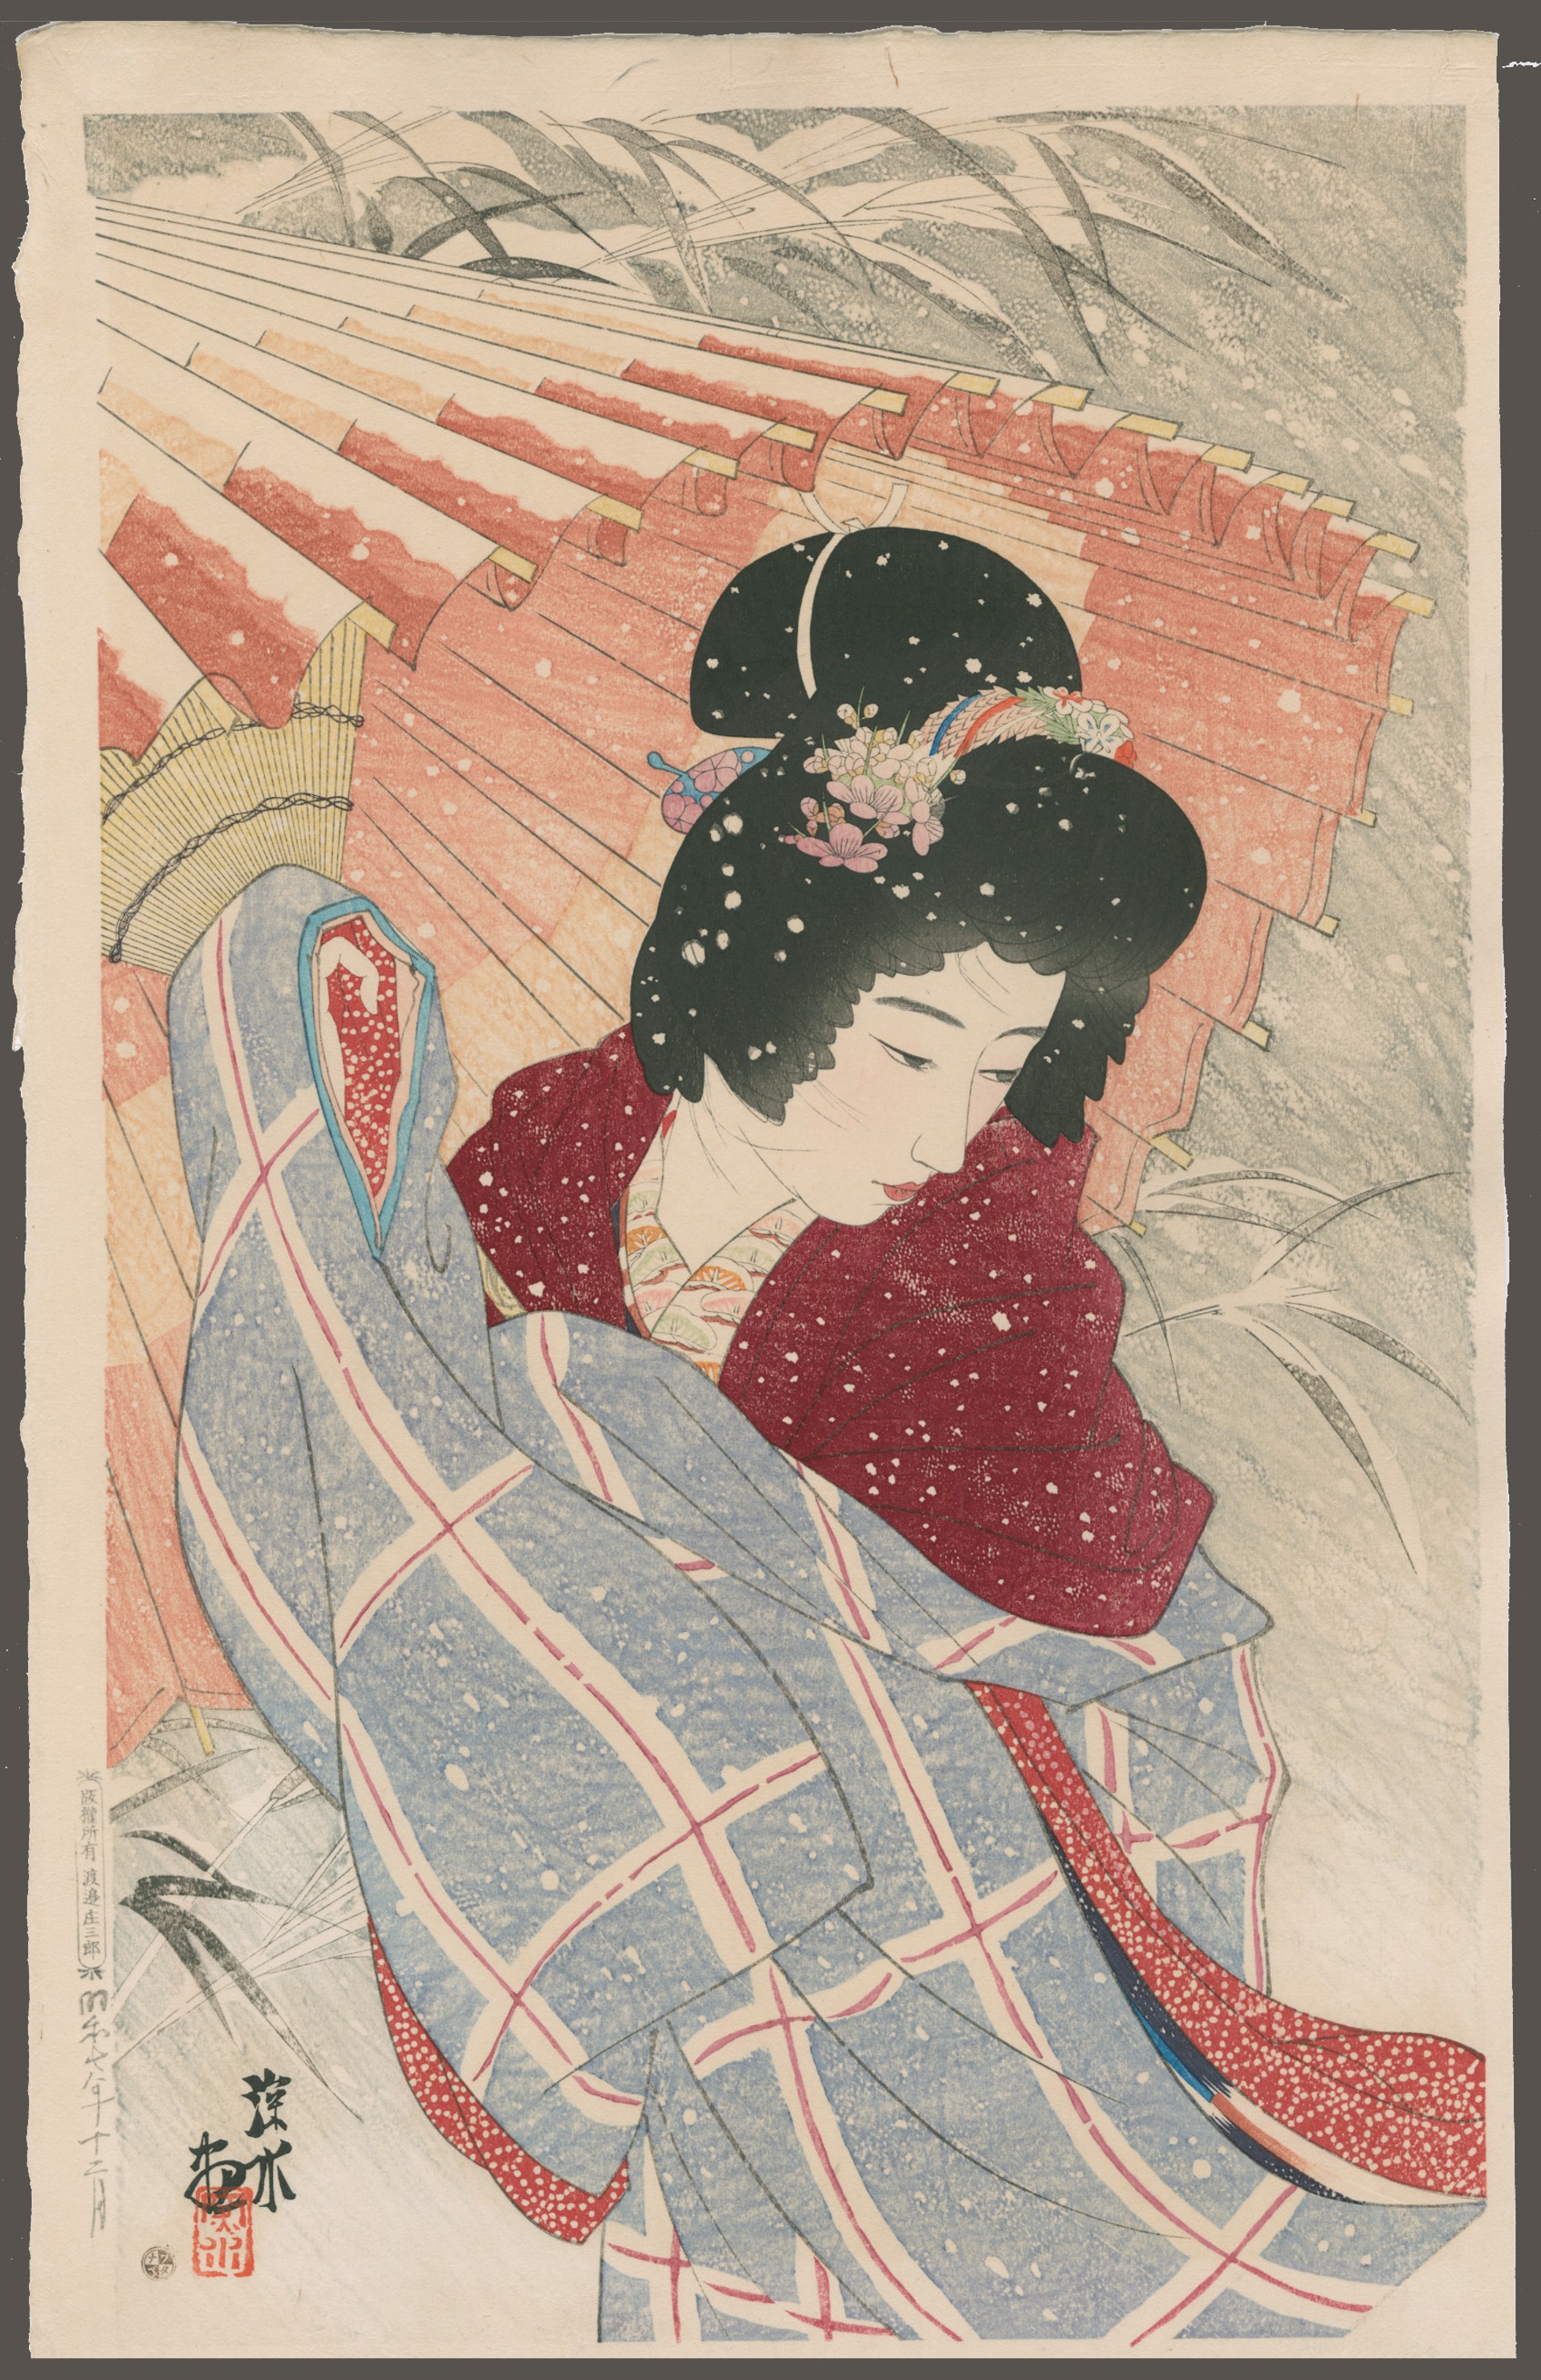 Snowstorm 2nd Series of Modern Beauties by Shinsui